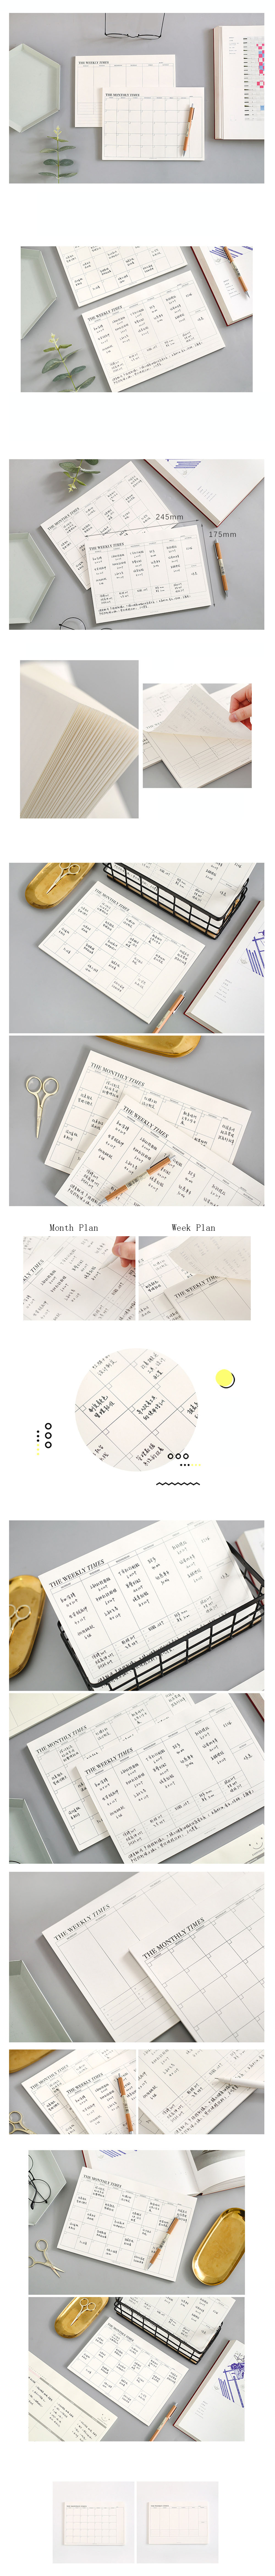 Simple-Business-Notebook-Removable-Notebook-Office-Thick-Calendar-With-Medium-Sized-Memorandum-1444582-1